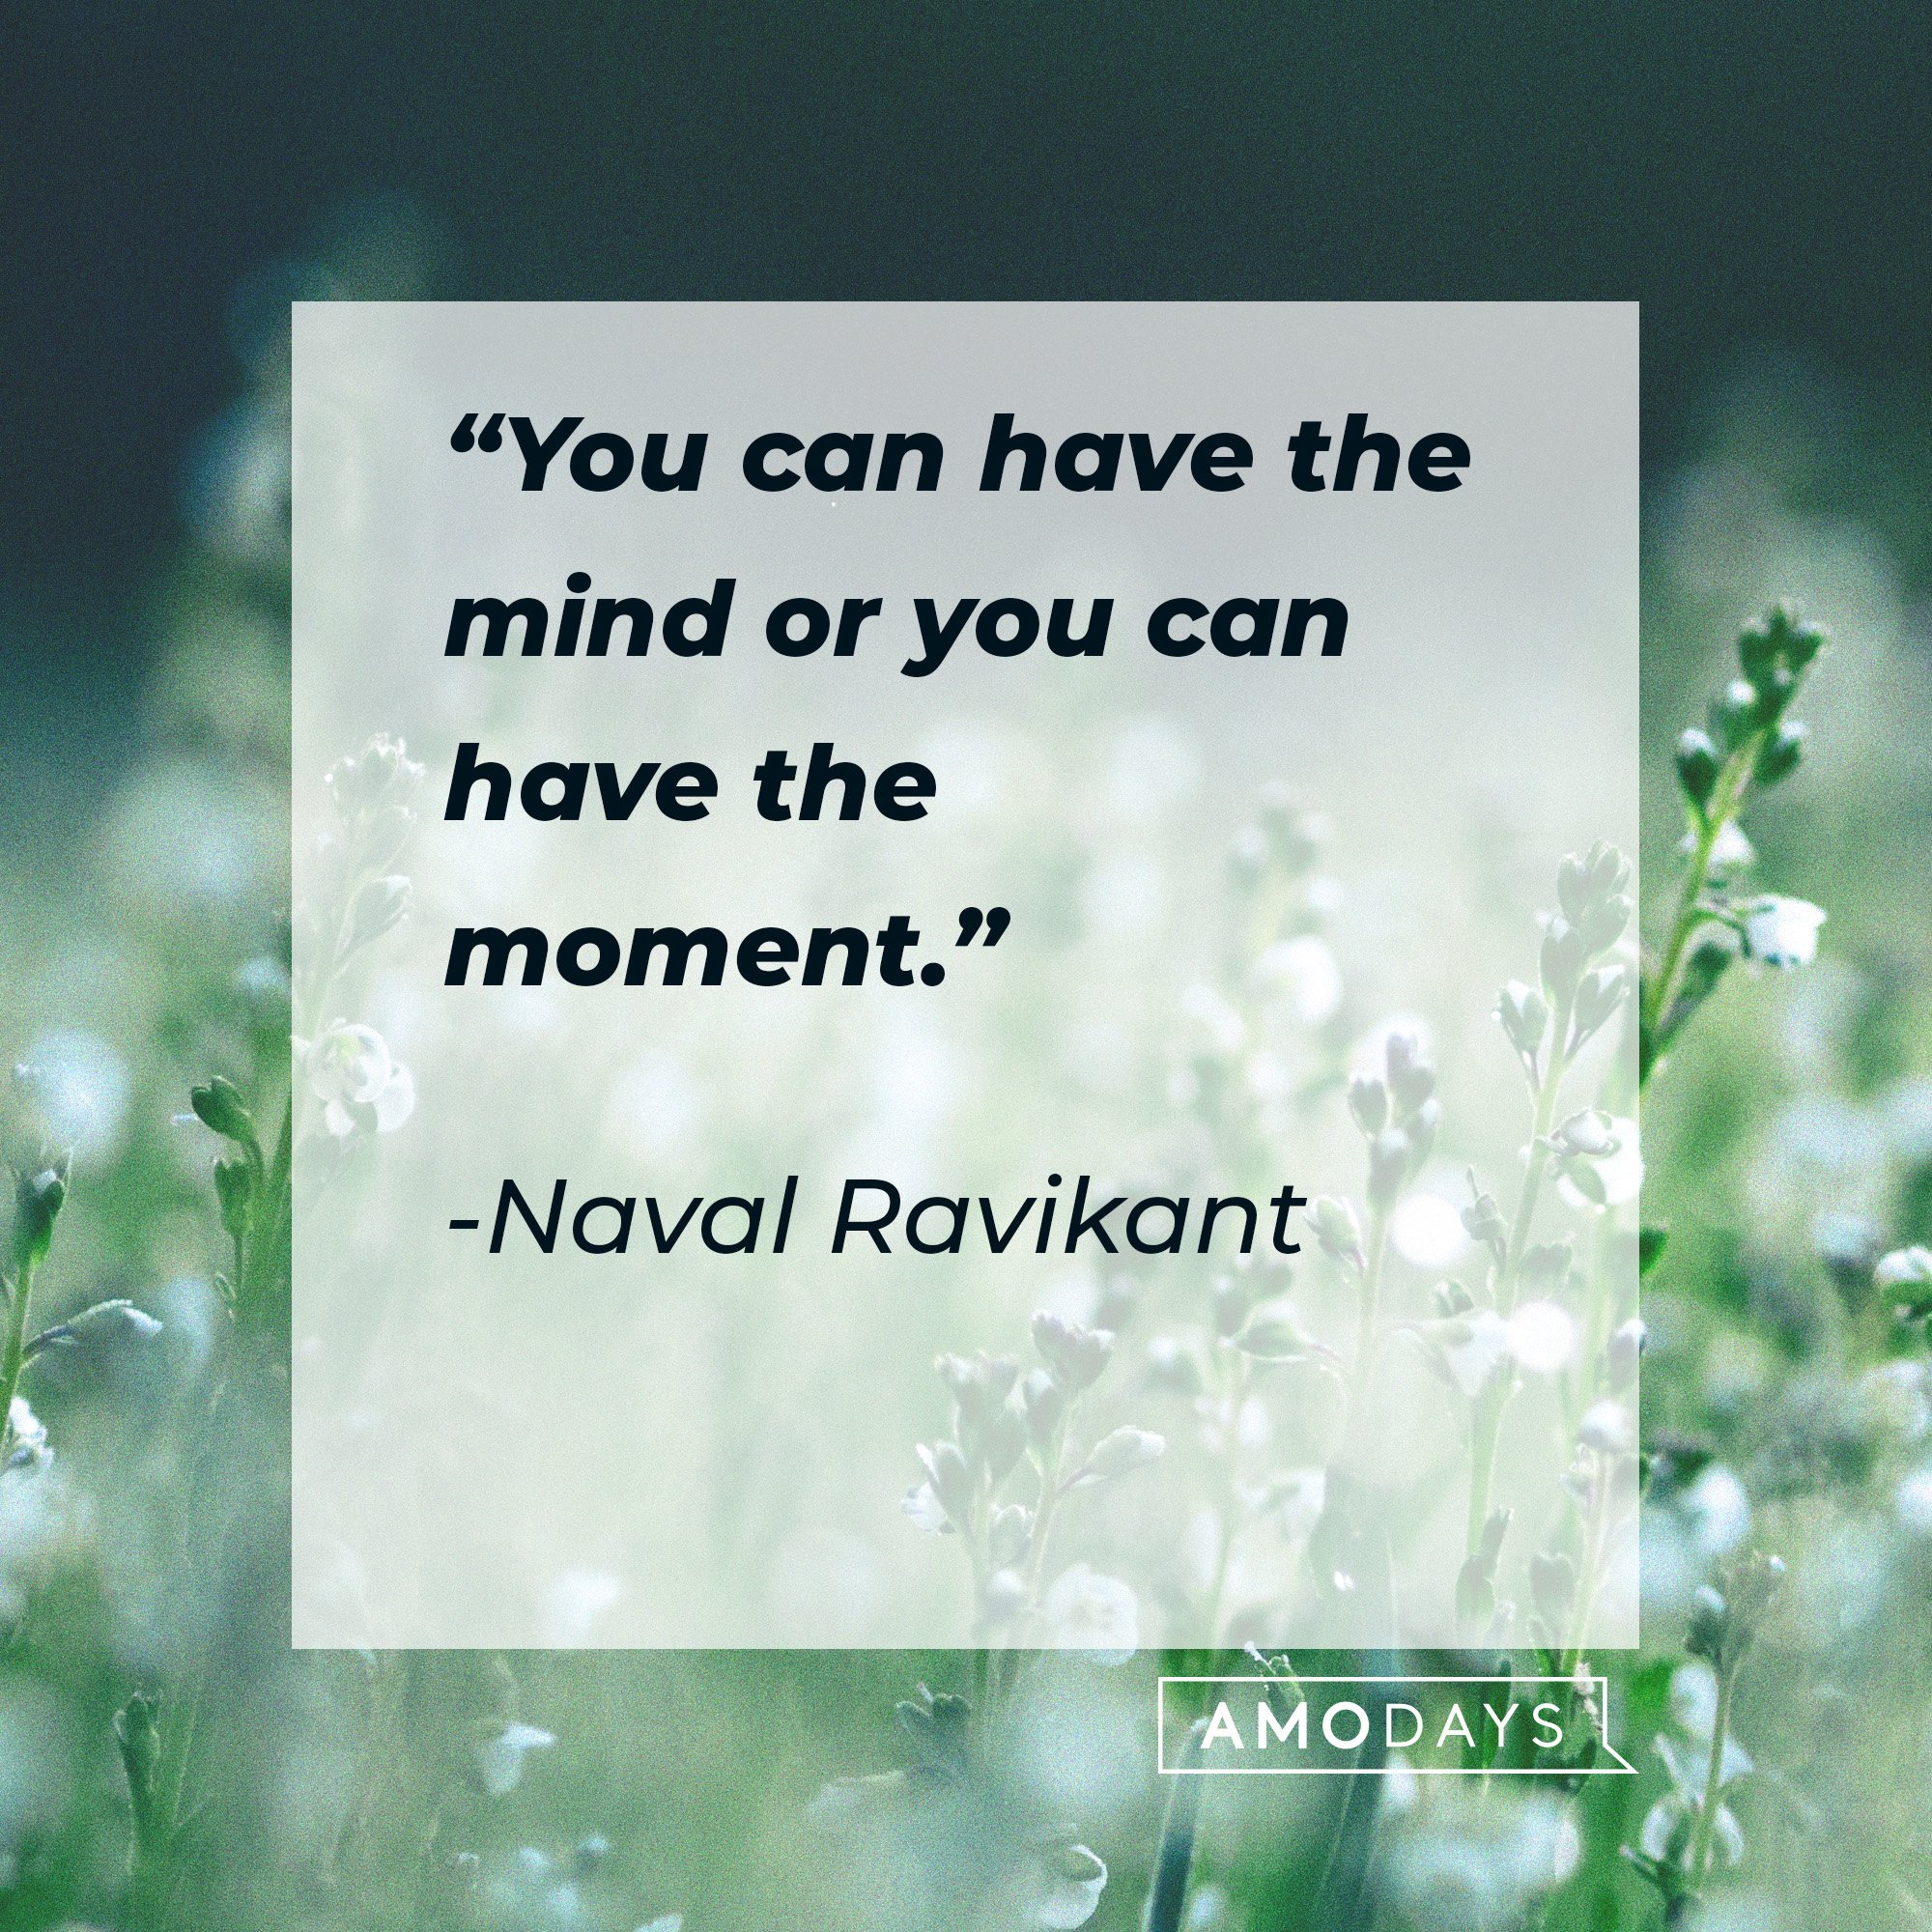  Naval Ravikant's quote: “You can have the mind or you can have the moment.” | Image: AmoDays